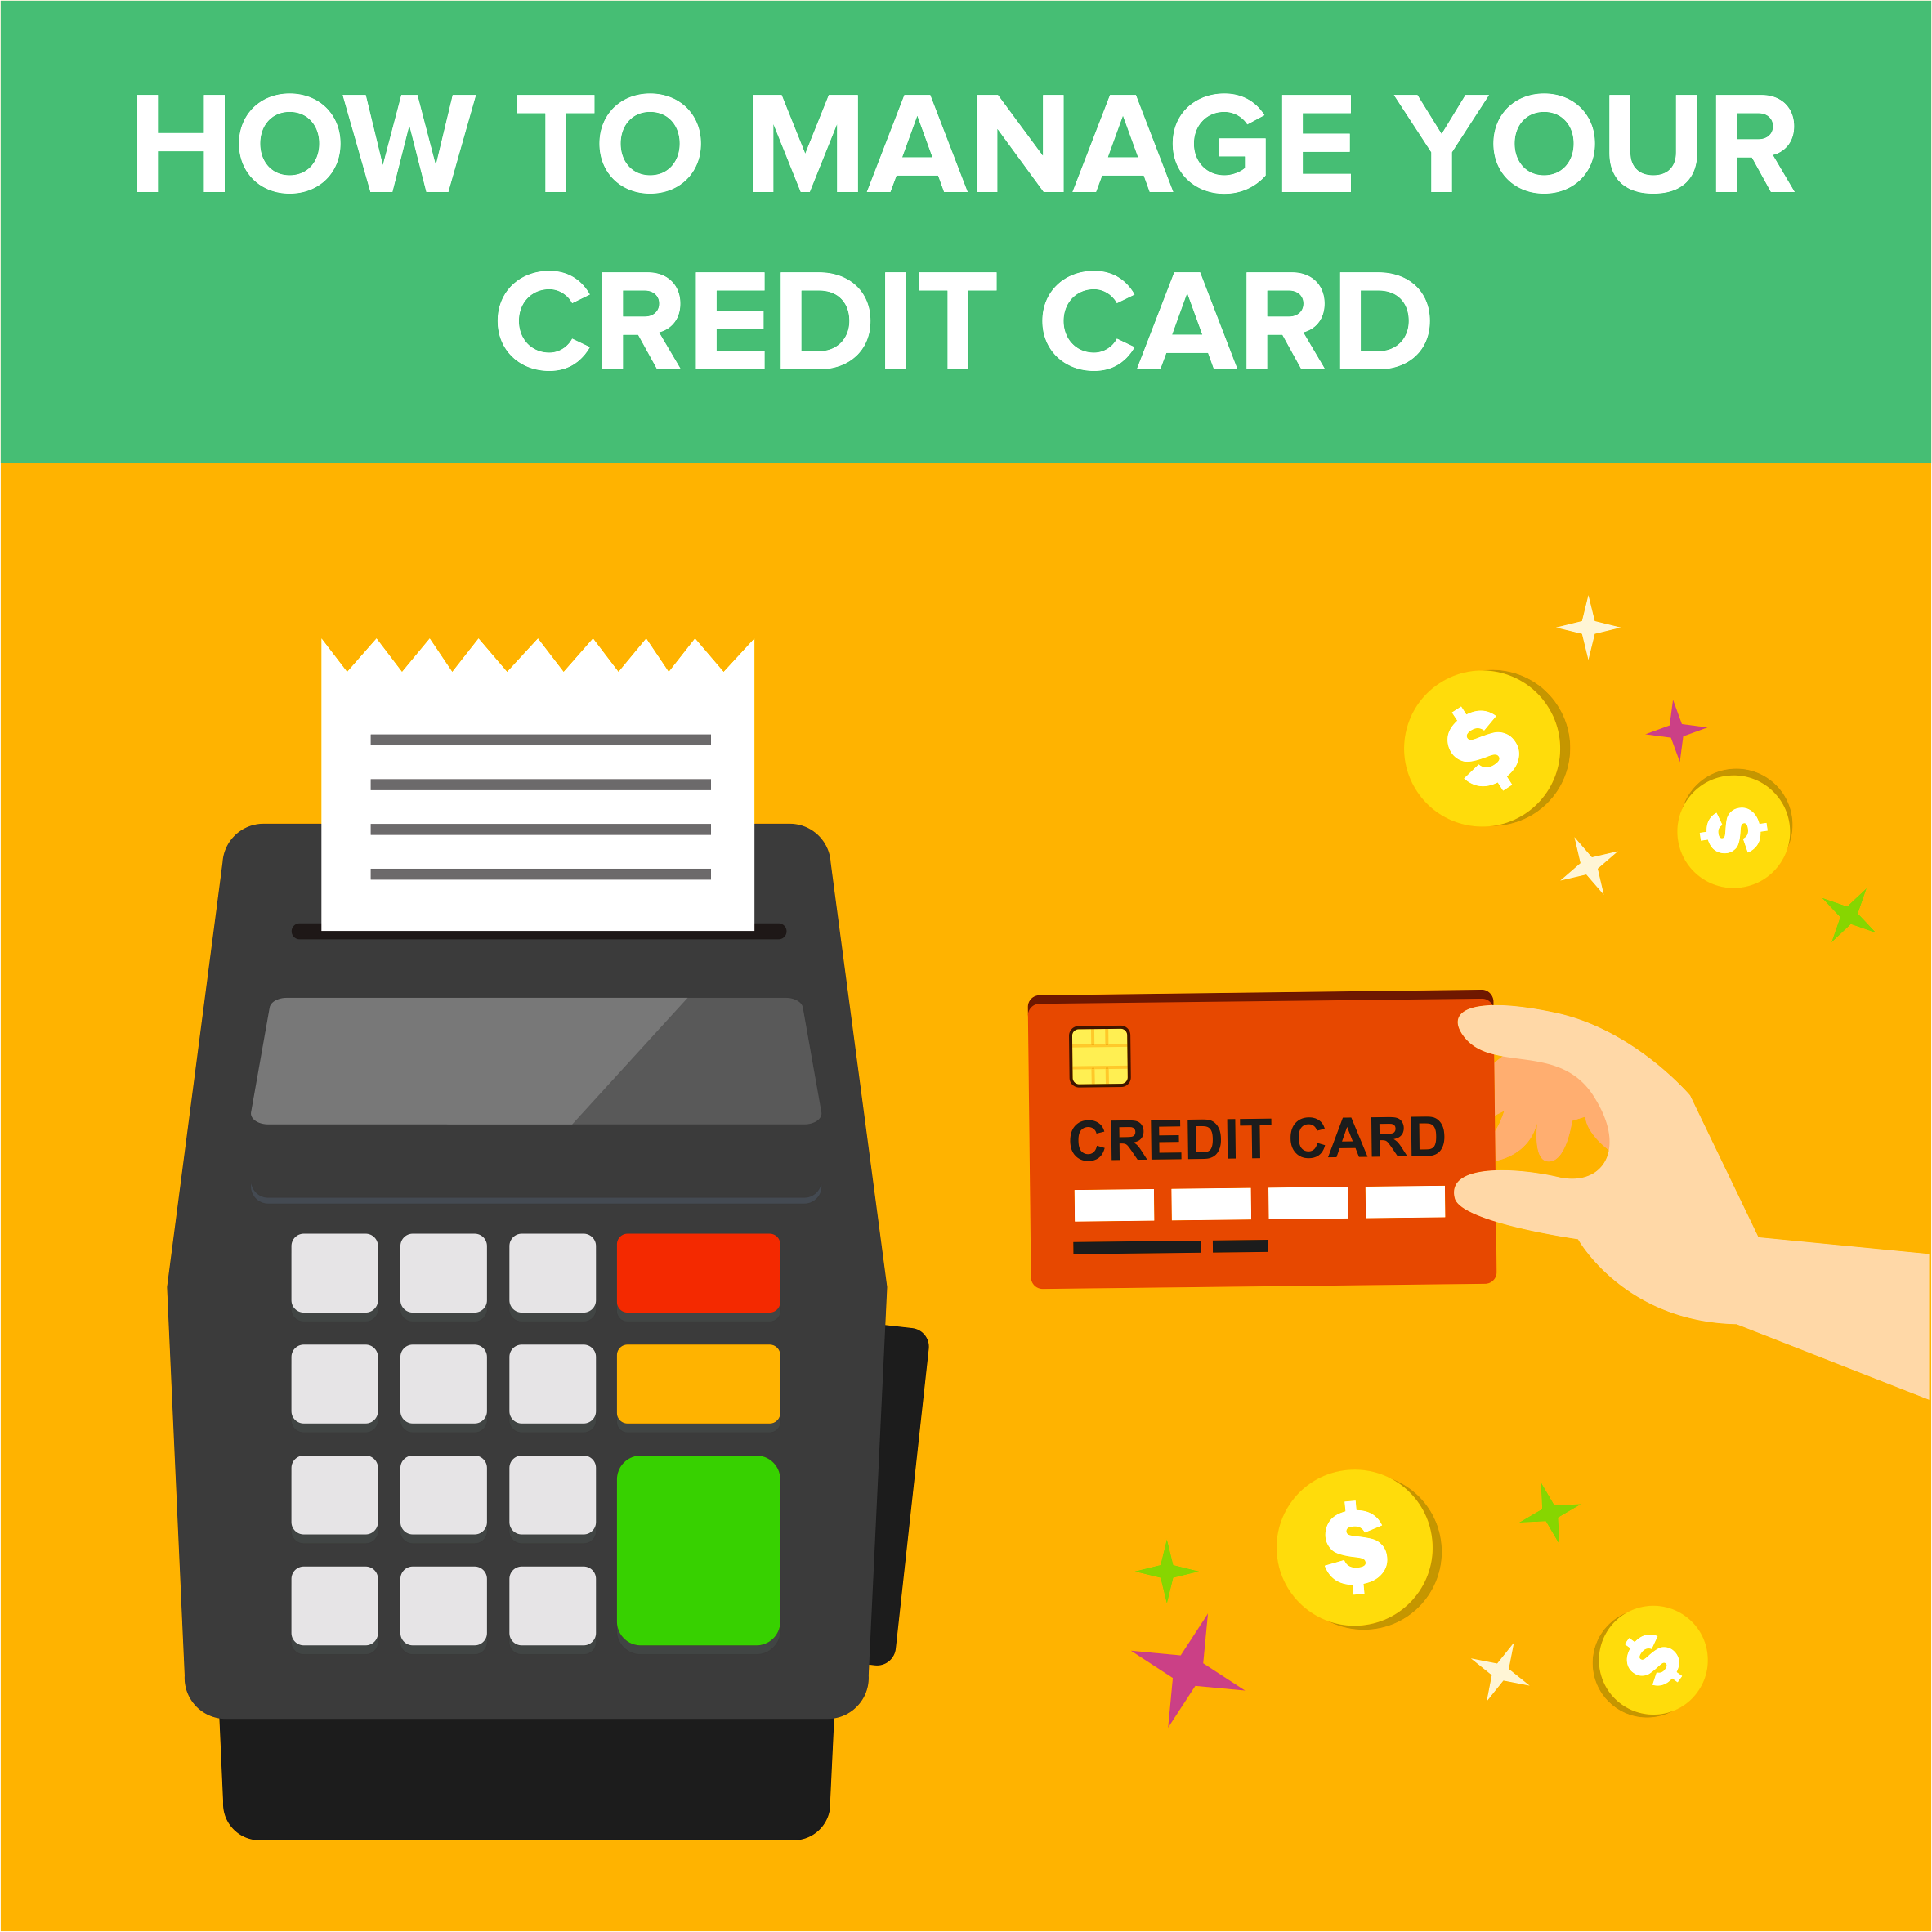 How to Manage Your Credit Card